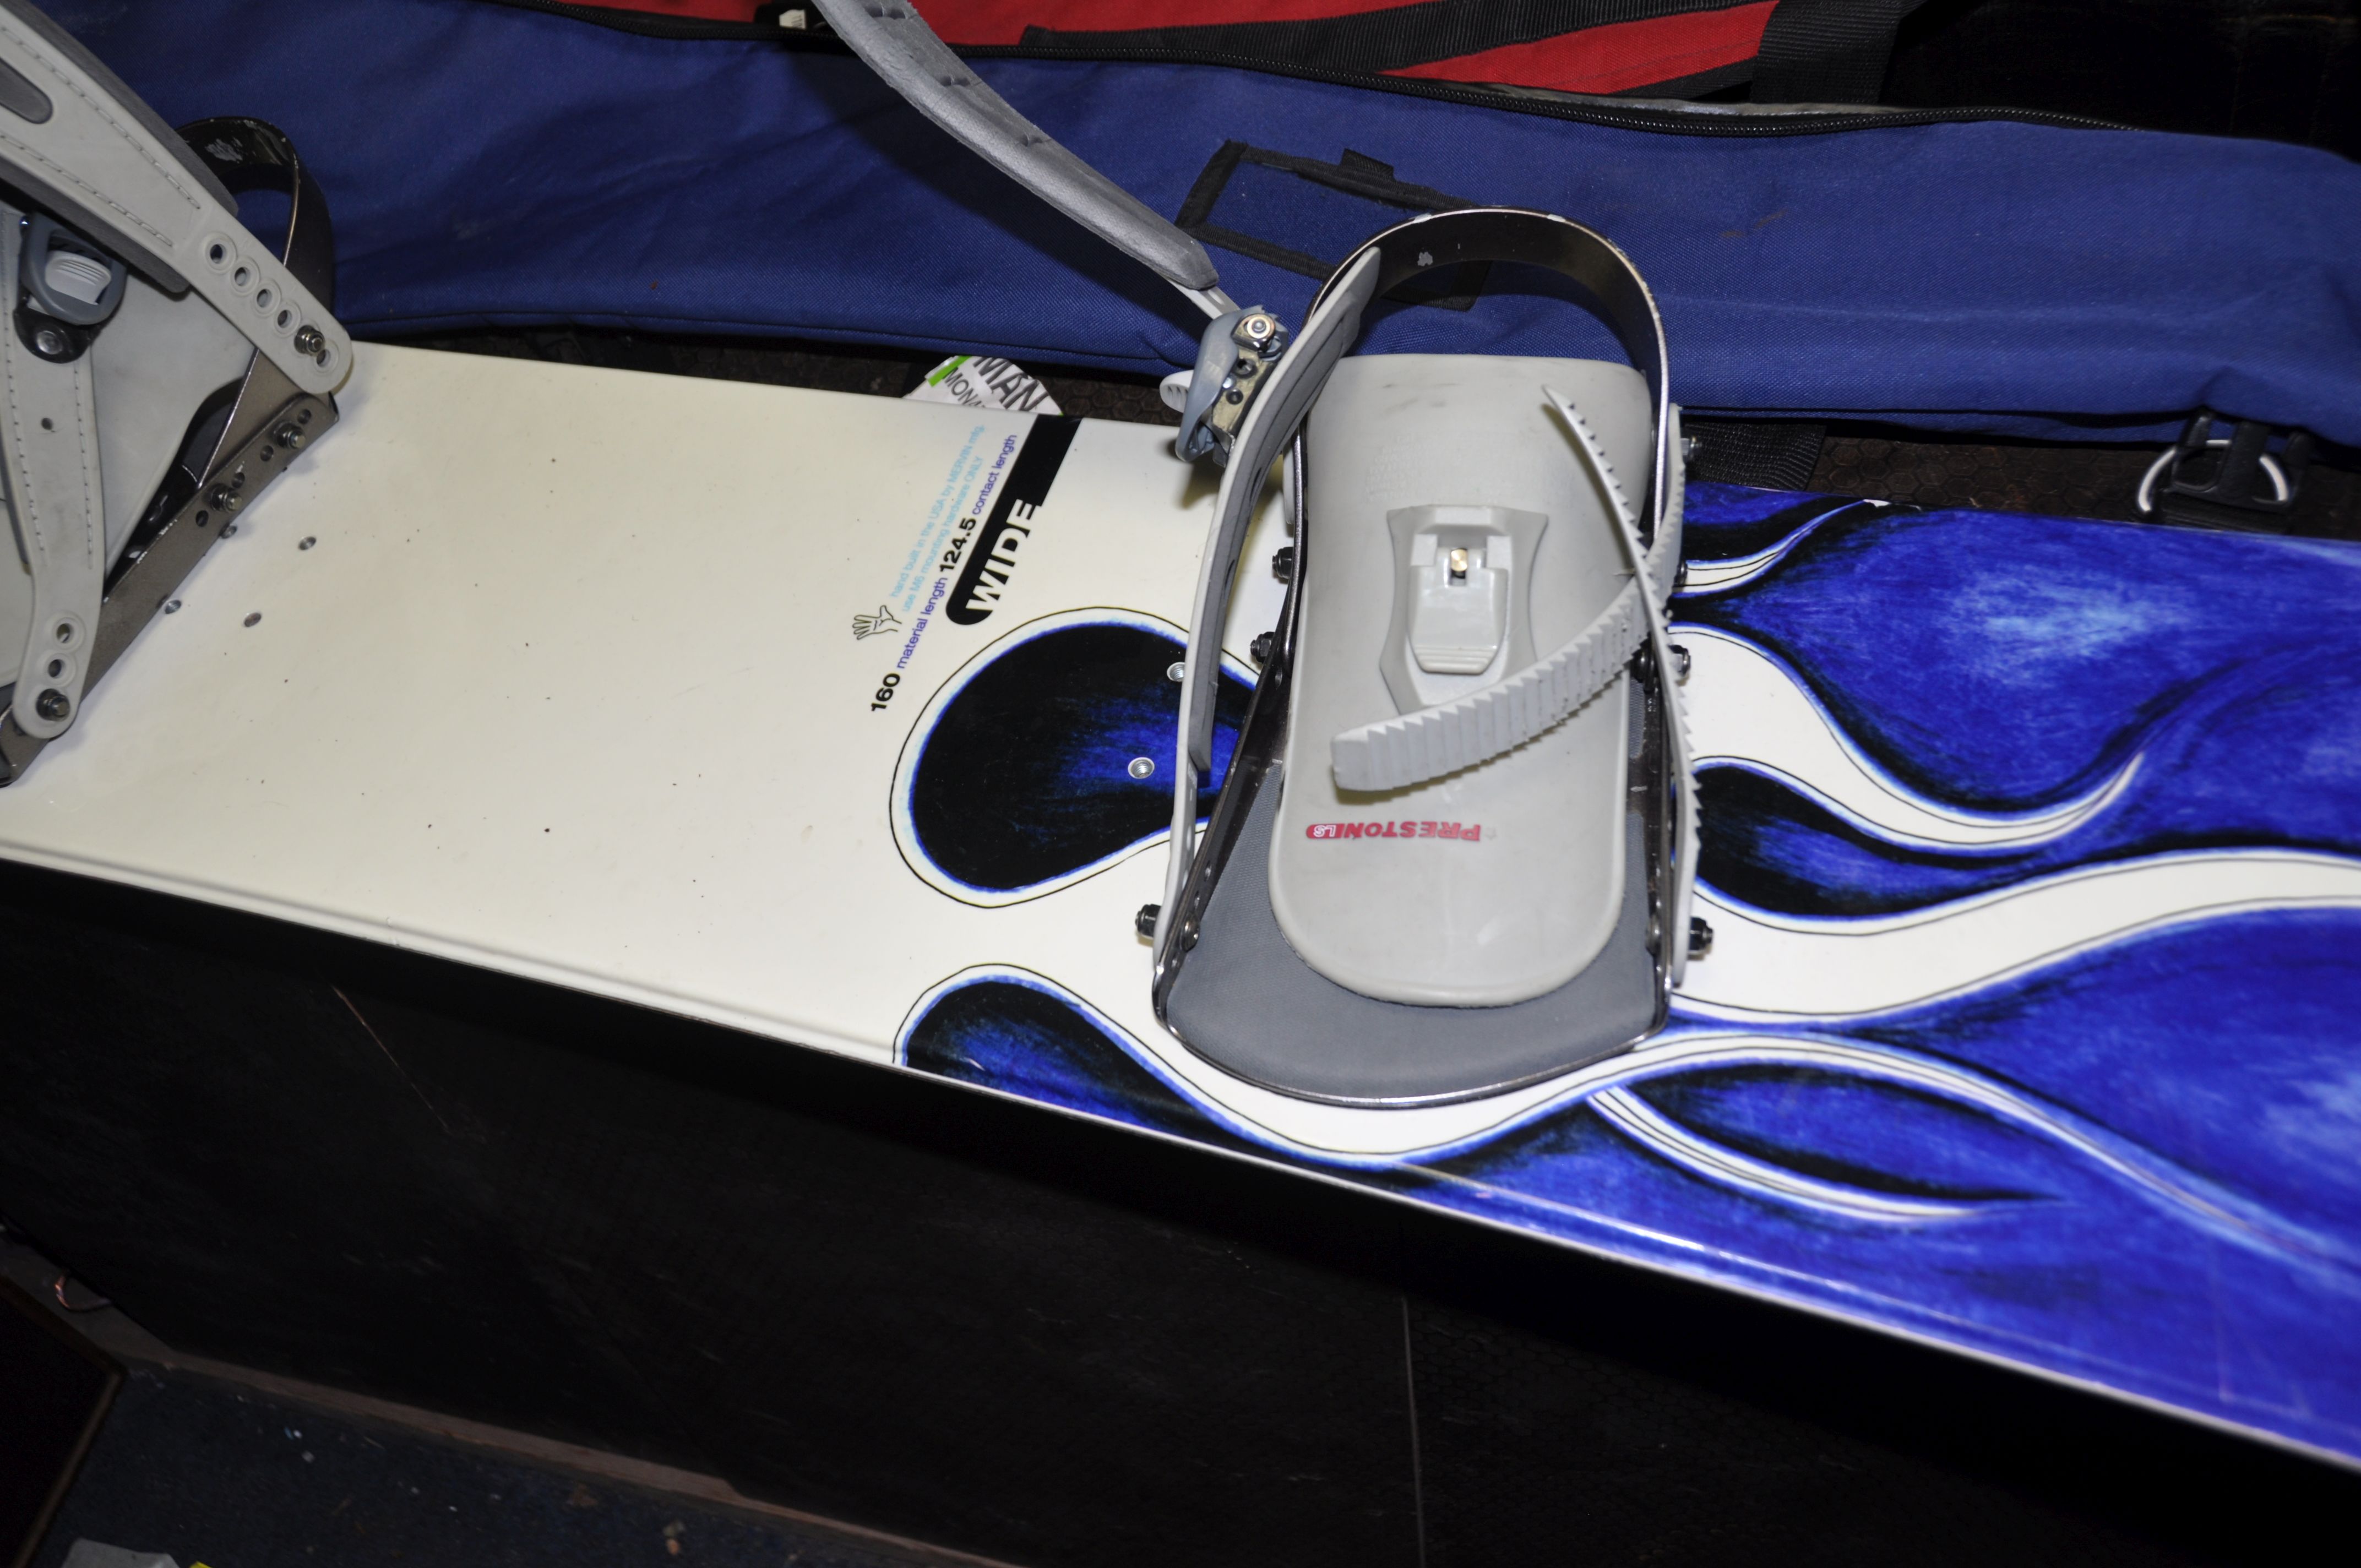 A MERVIN GRU CARBON HIGH BEAMS 160 SNOW BOARD with toe clips, Board wise bag and a pair of Burton - Image 3 of 4